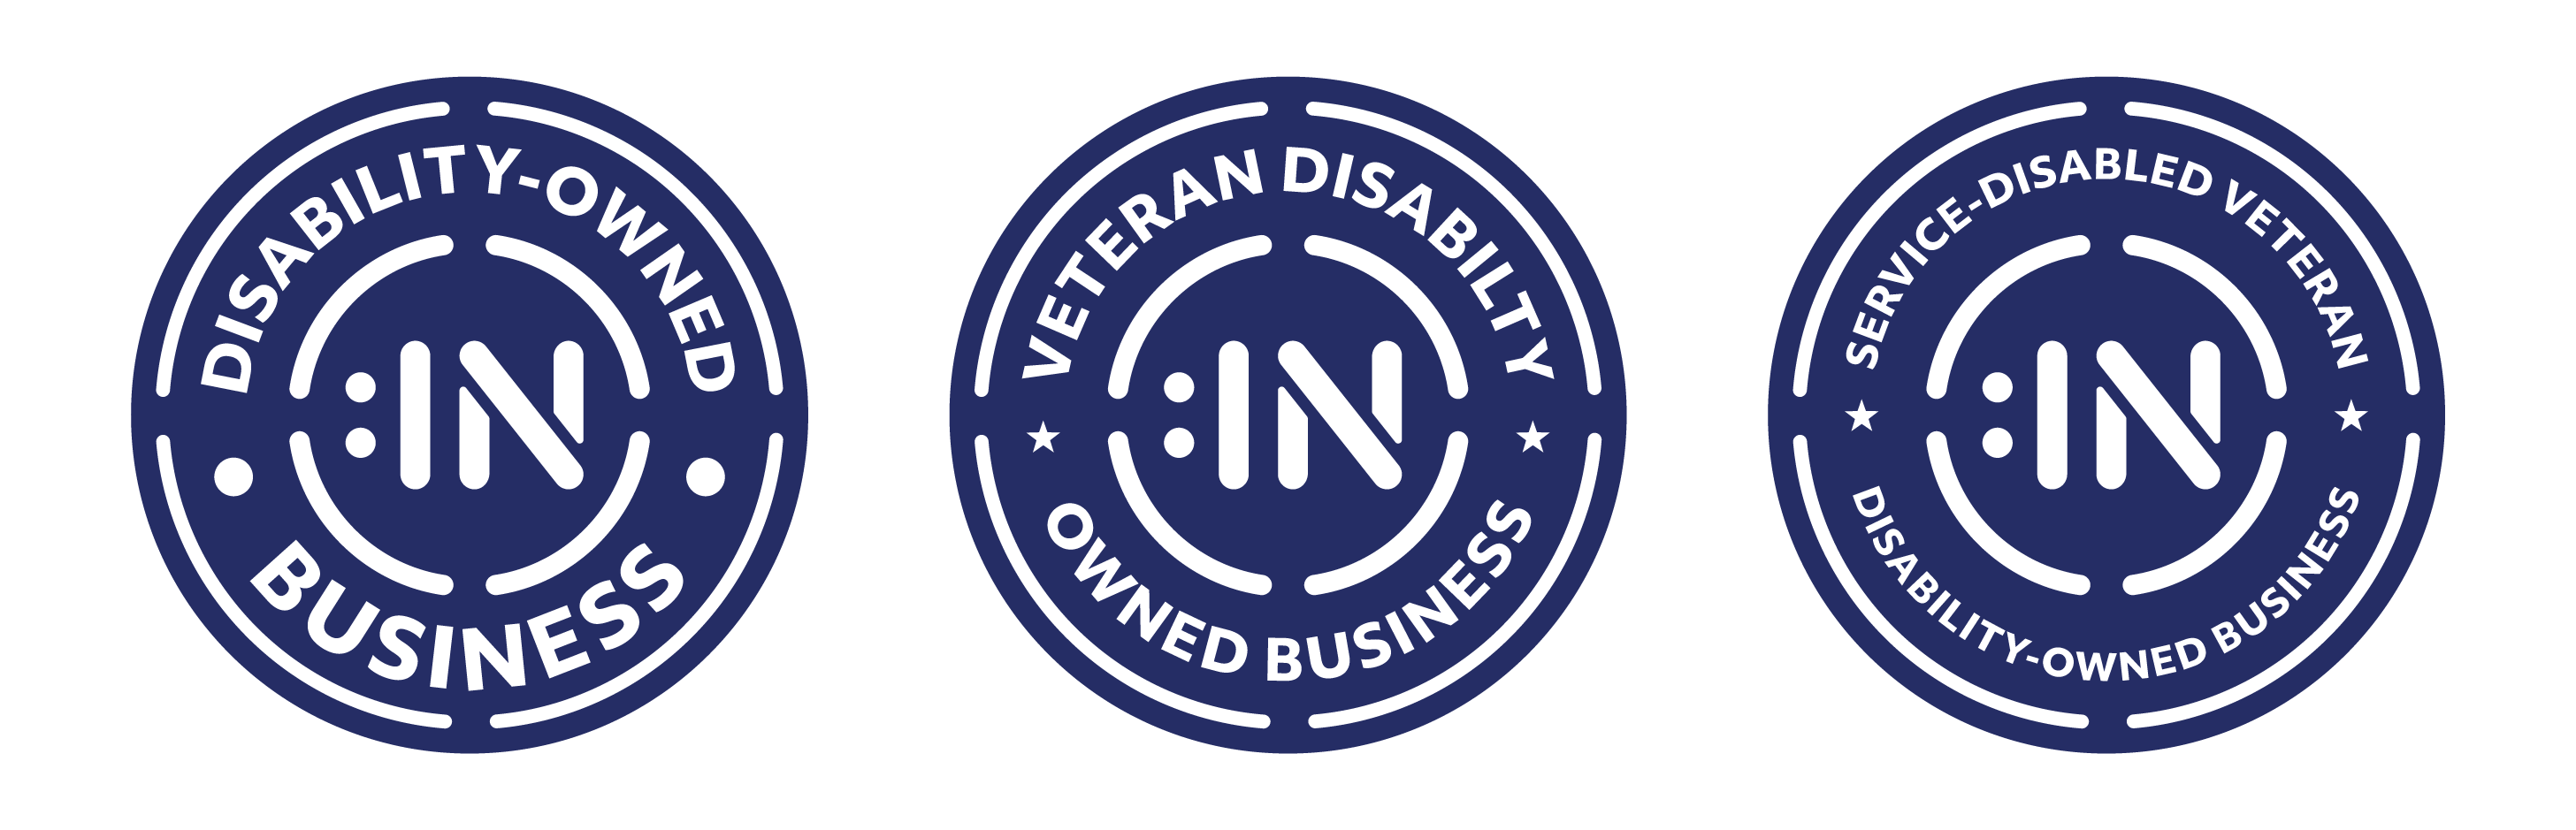 Disability-Owned Business, Veteran Disability-Owned Business, Service-Disabled Veteran Disability-Owned Business certification logos.